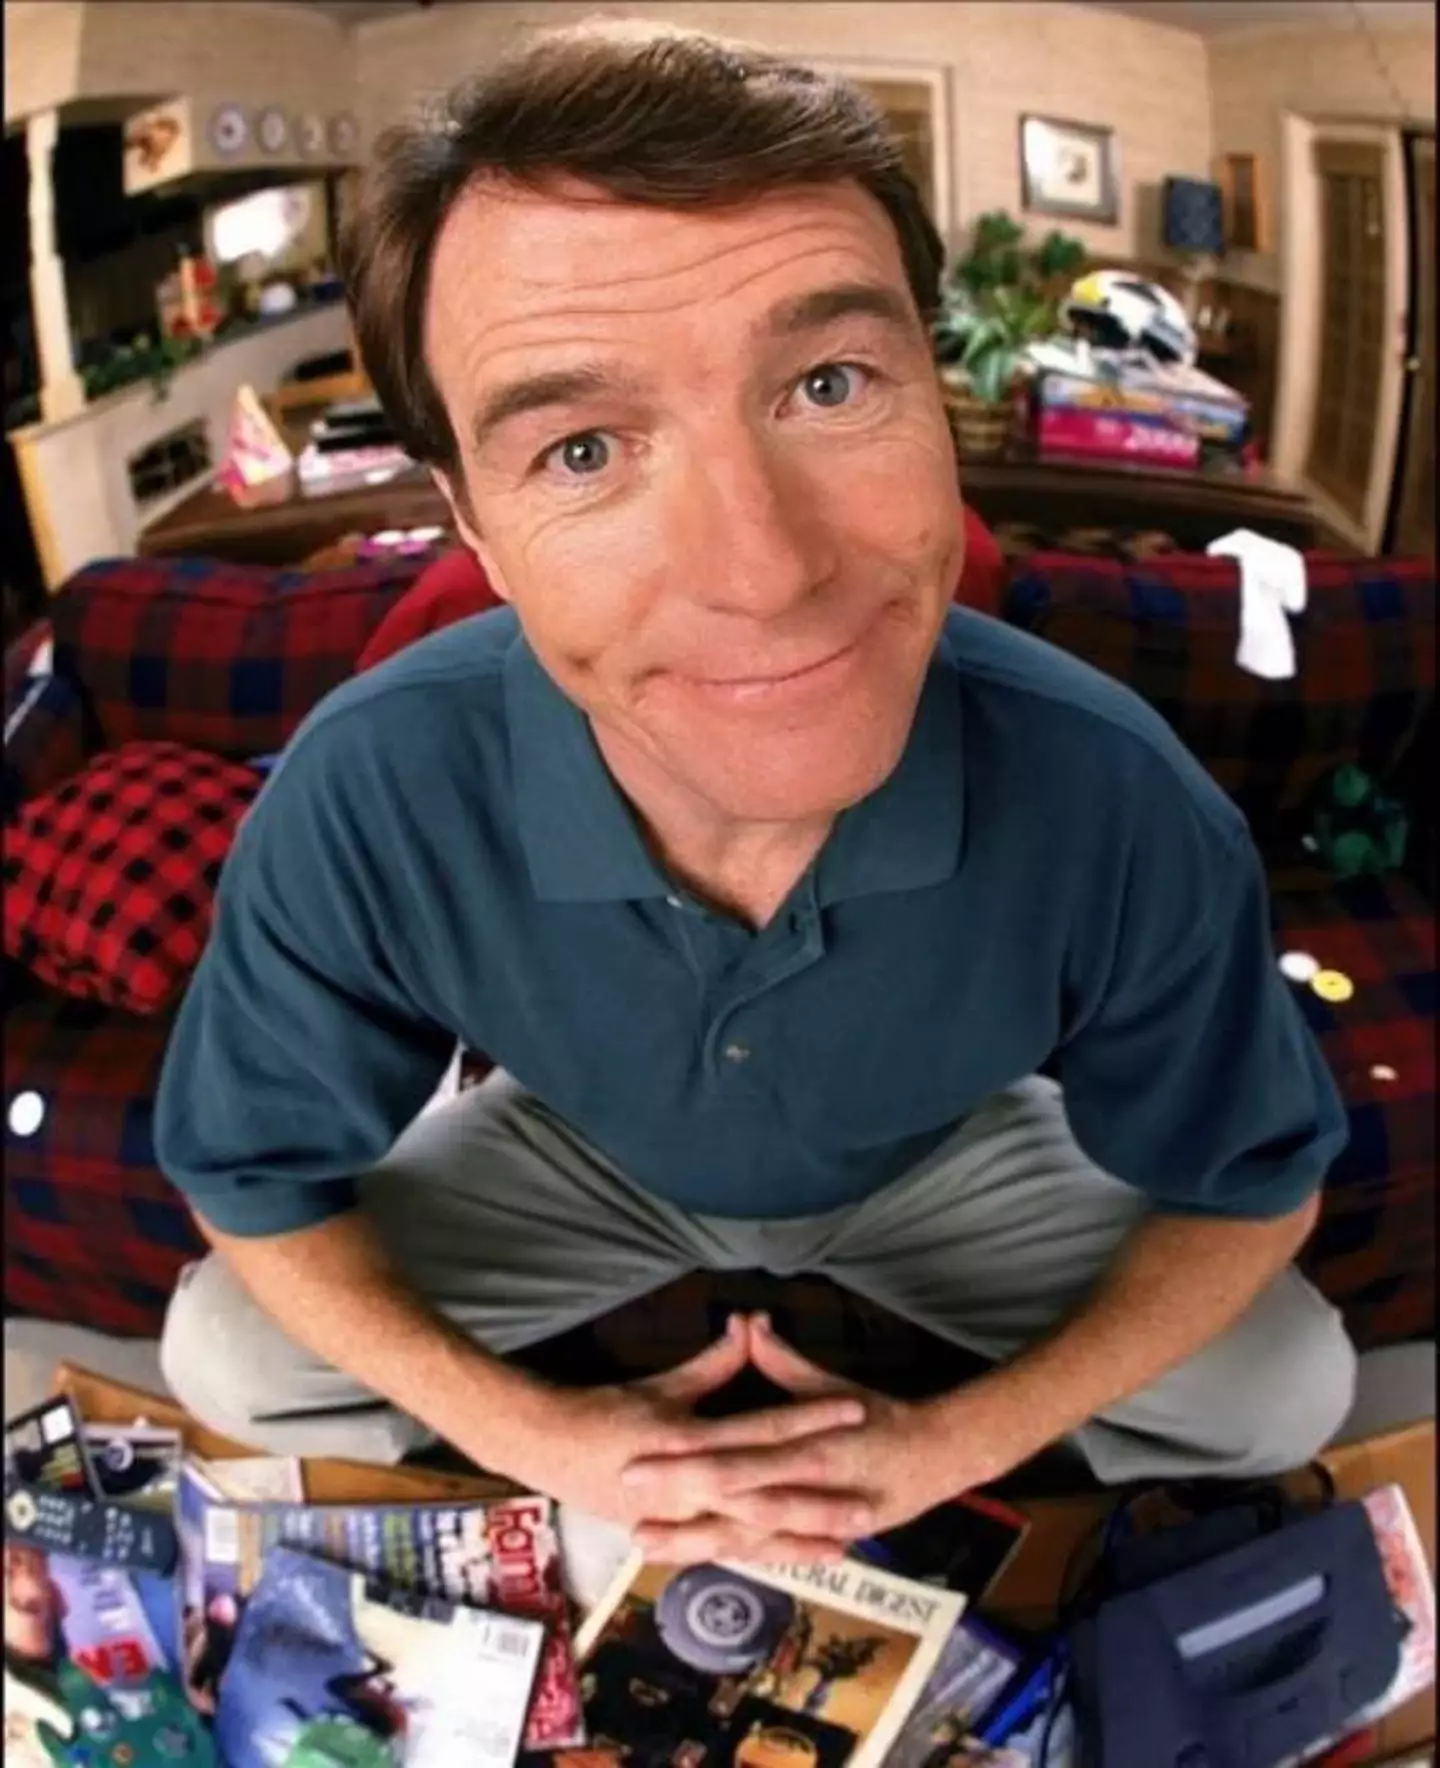 Bryan Cranston played Hal in Malcolm in the Middle.